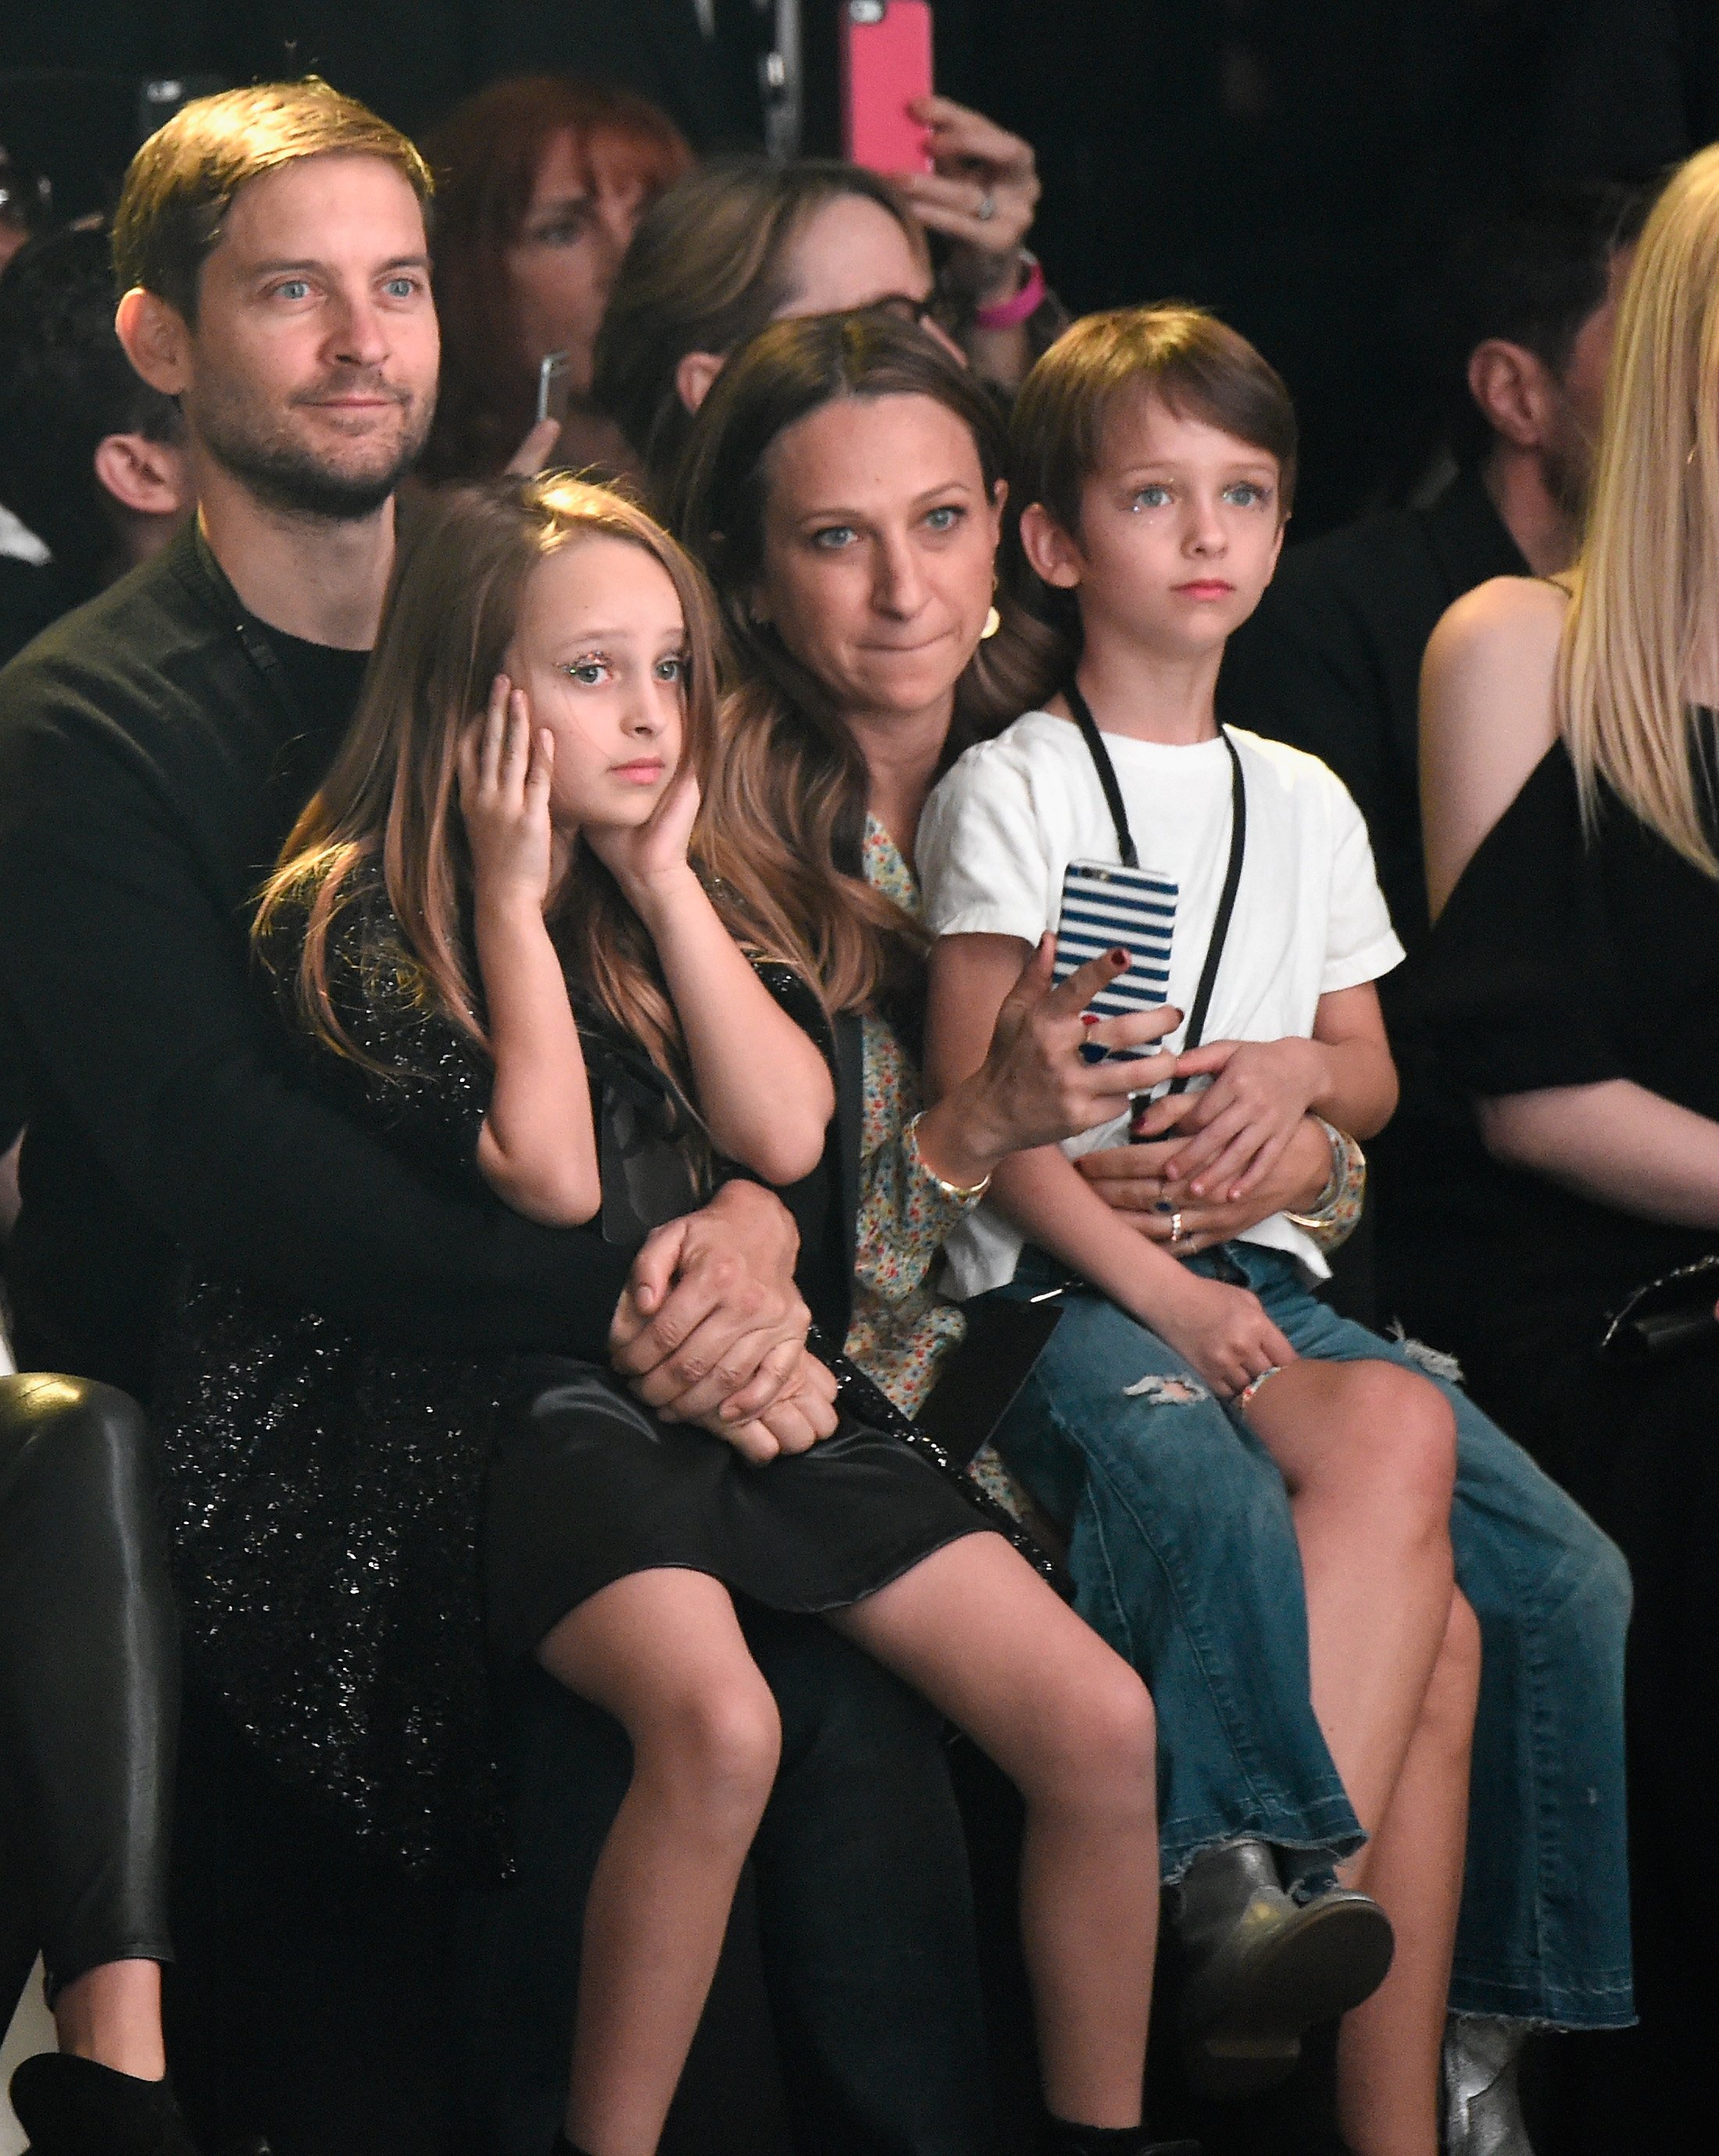 Tobey Maguire, Ruby Maguire, designer Jennifer Meyer, and Otis Tobias Maguire at the Palladium in 2016 in Los Angeles. | Source: Getty Images